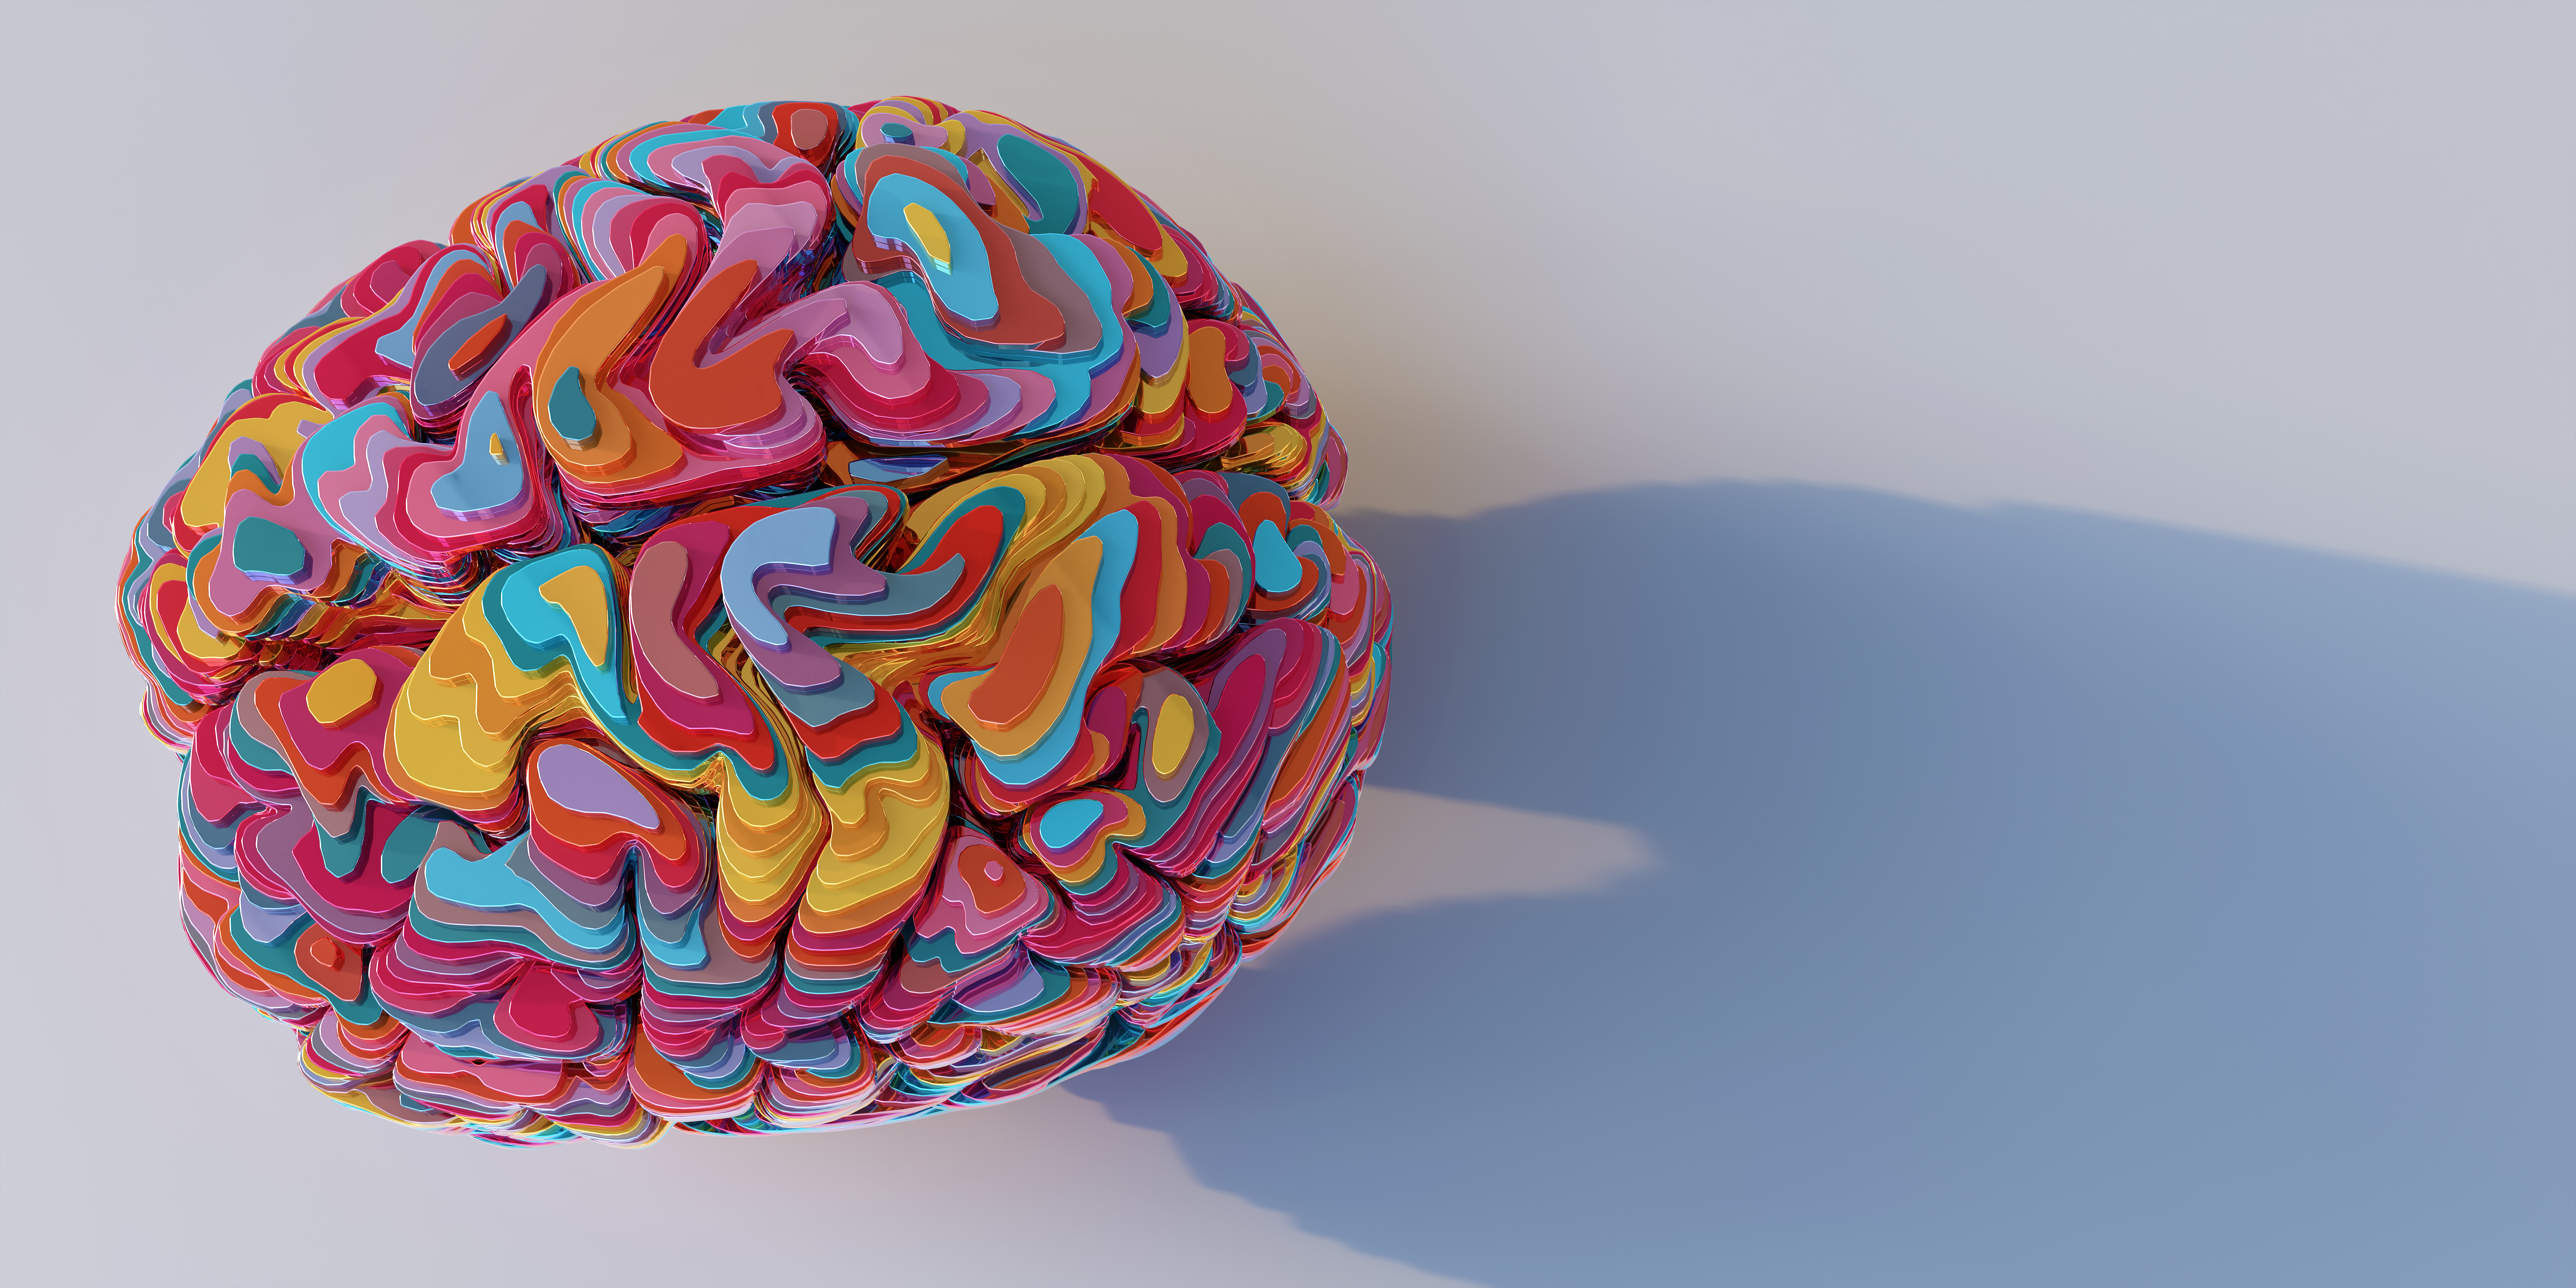 An abstract coloured image of a brain